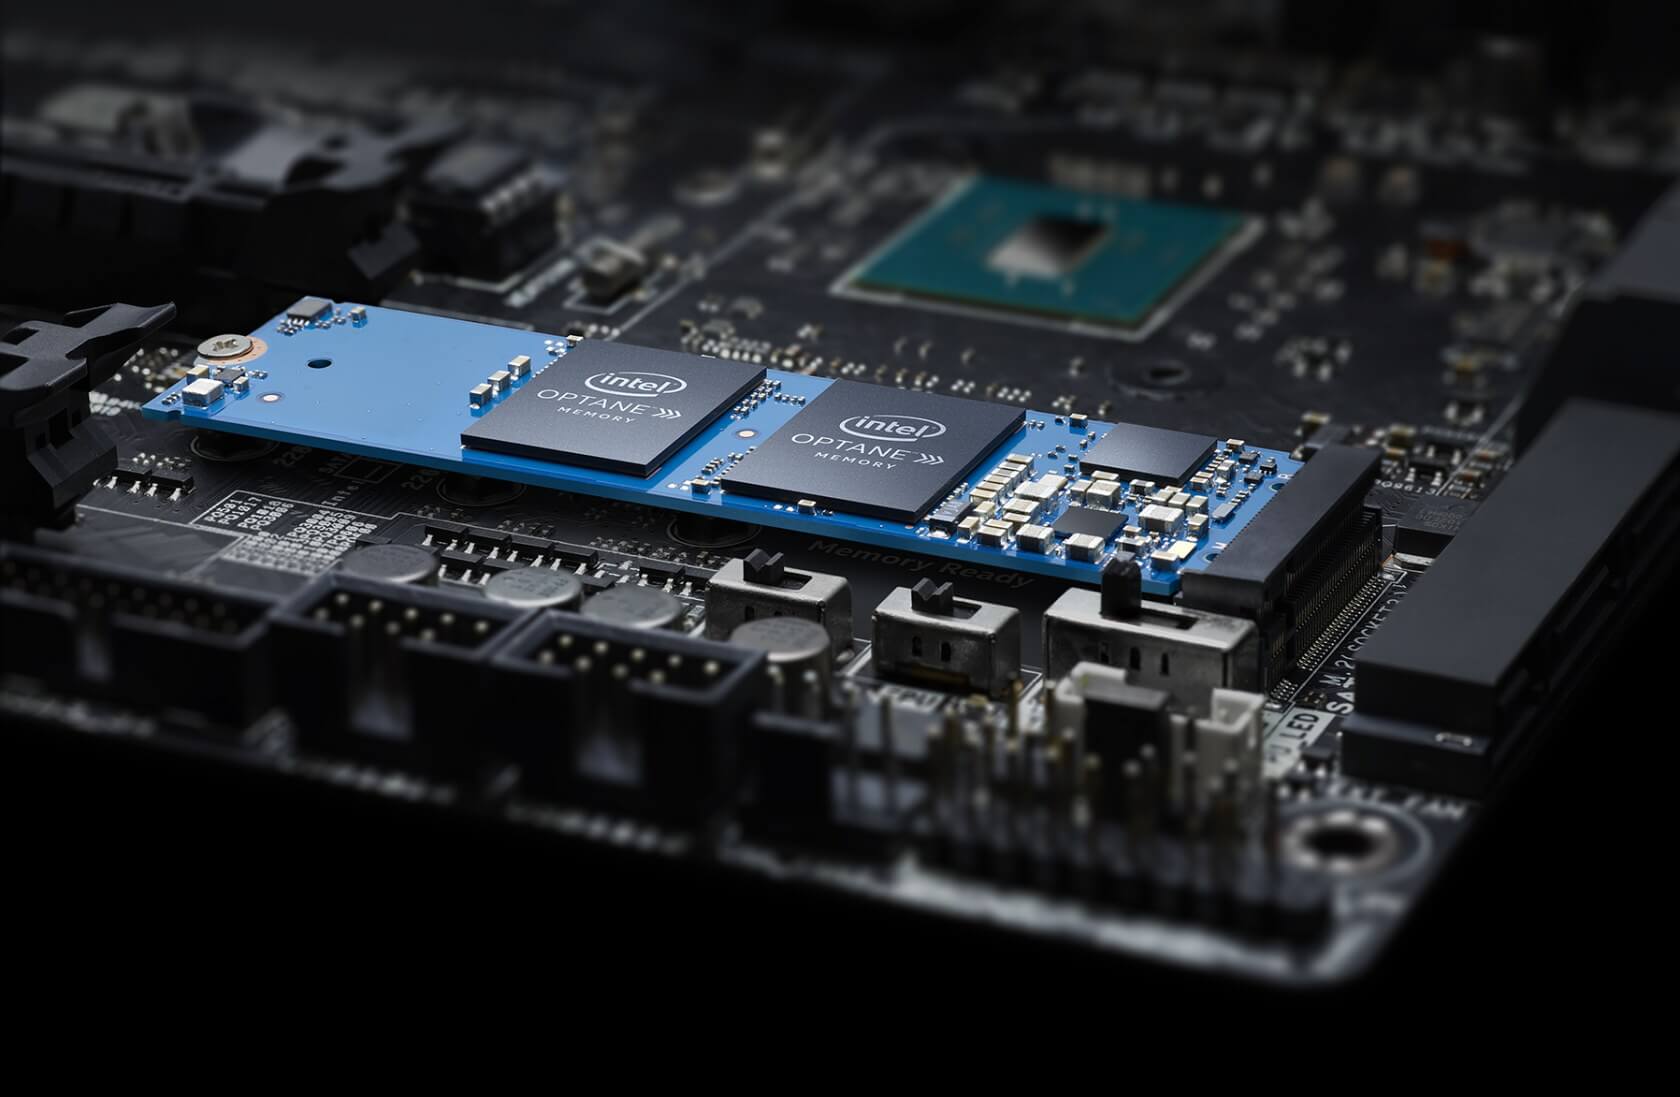 Intel's Optane memory doesn't like the Windows 10 May 2020 update